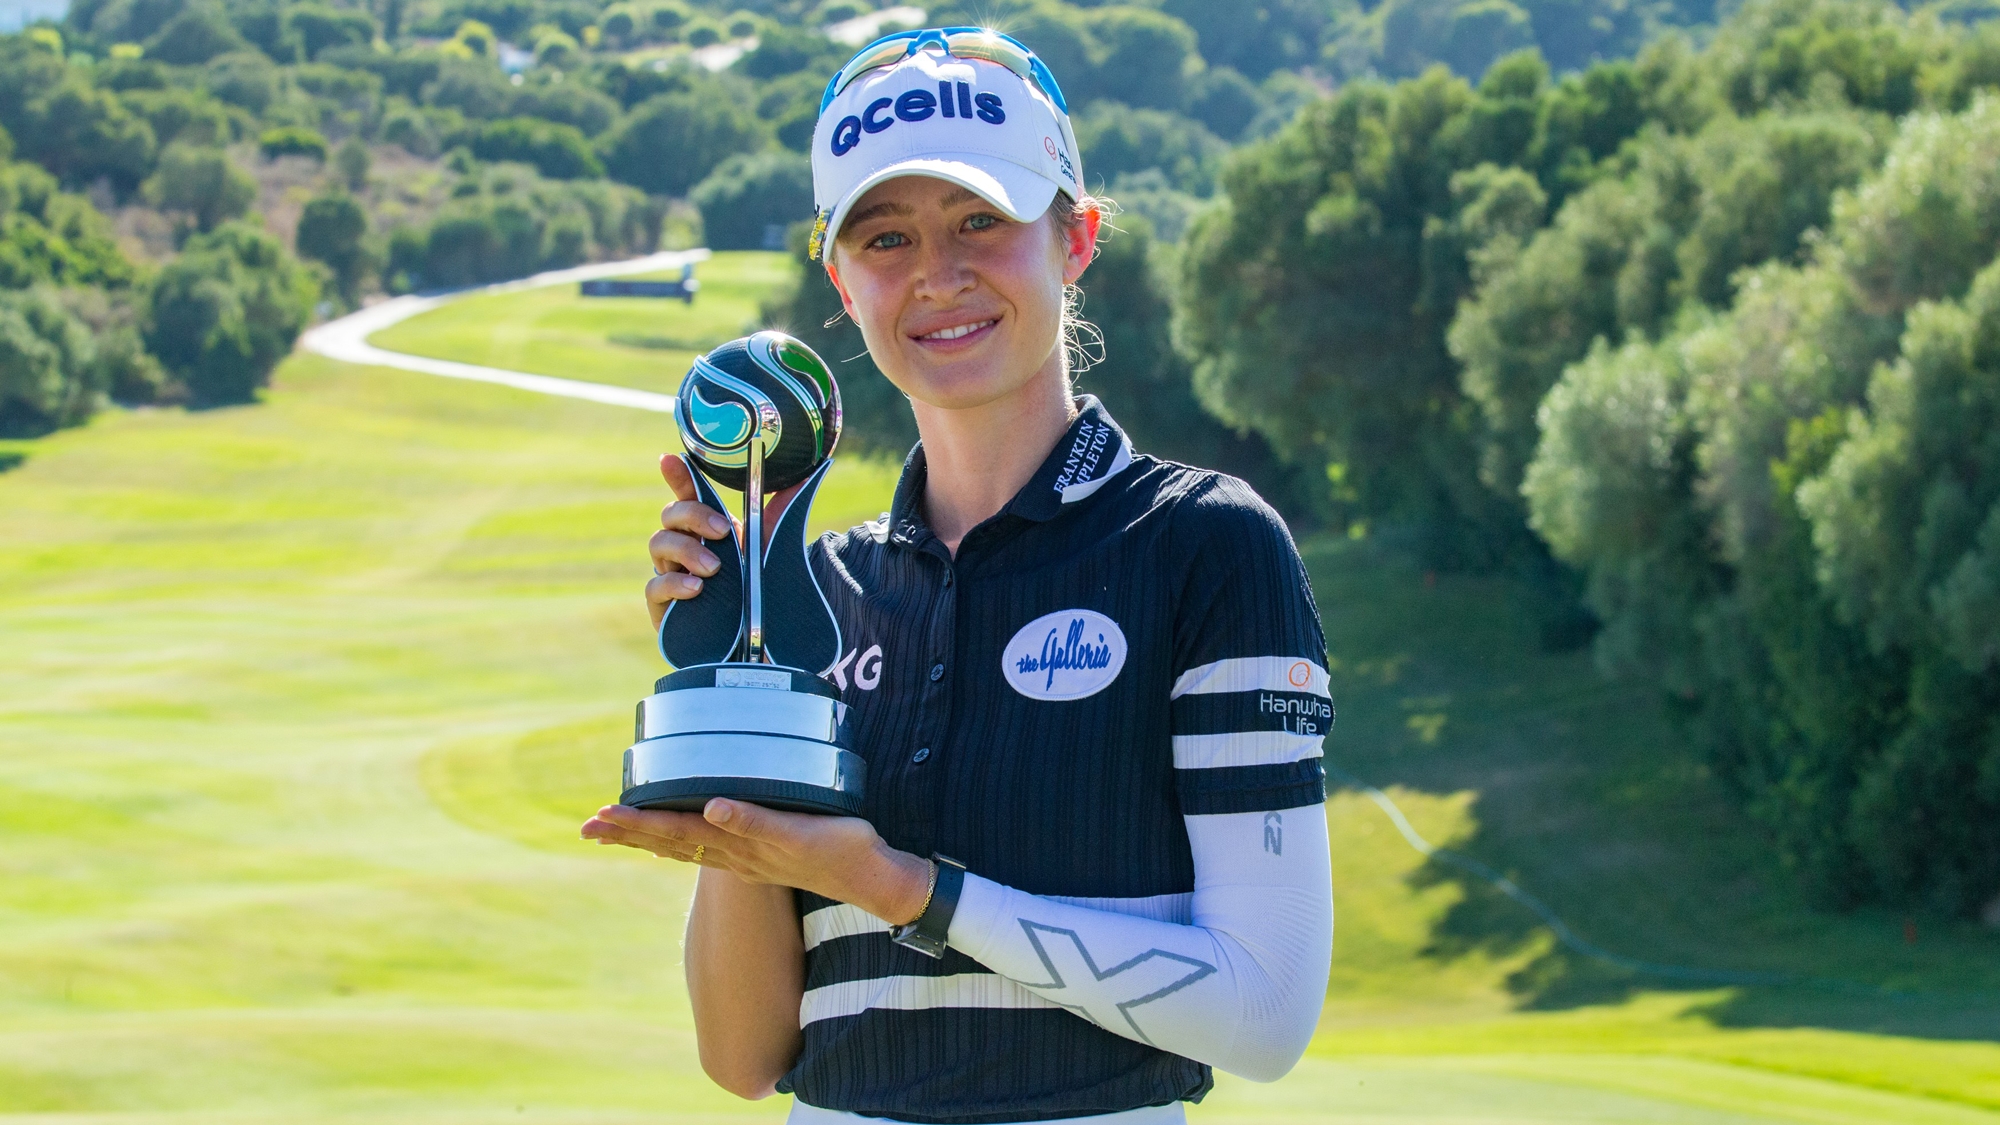 Is Nelly Korda Still the World Number 1? An Exploration of Her